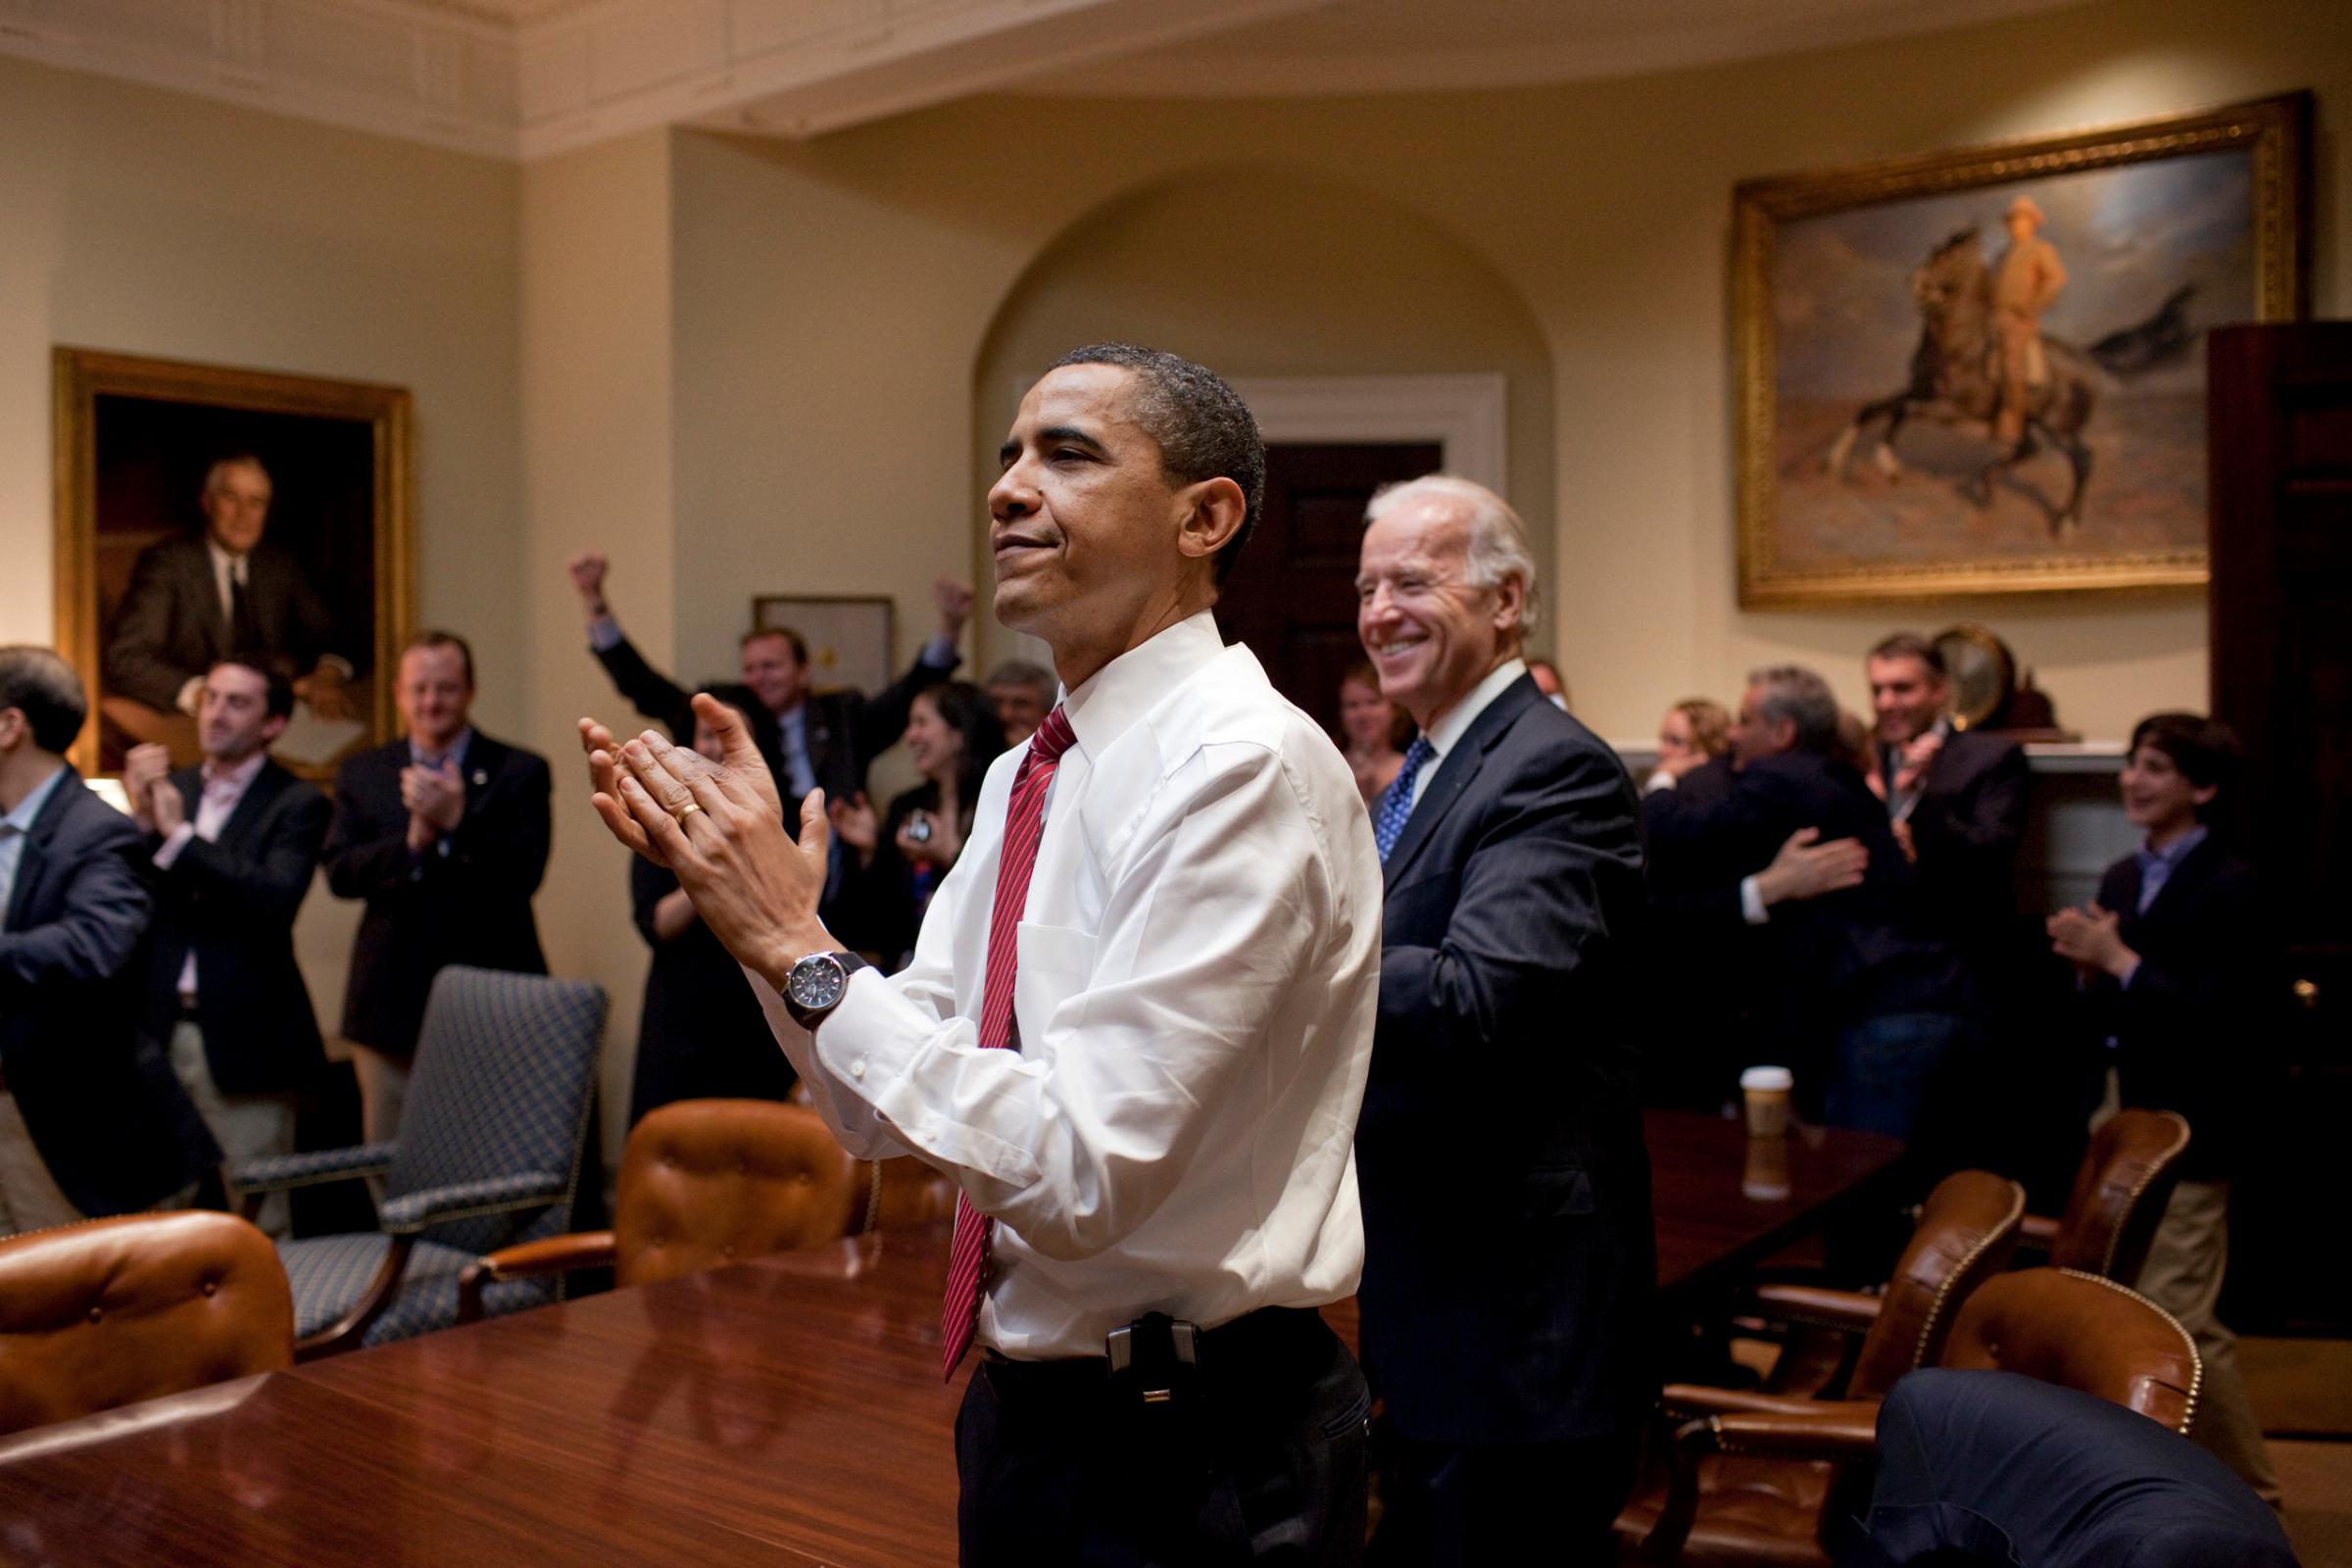 President Barack Obama, Vice President Joe Biden, and senior staff, react in the Roosevelt Room of the White House, as the House passes the health care reform bill, March 21, 2010. (Official White House Photo by Pete Souza)This official White House photograph is being made available only for publication by news organizations and/or for personal use printing by the subject(s) of the photograph. The photograph may not be manipulated in any way and may not be used in commercial or political materials, advertisements, emails, products, promotions that in any way suggests approval or endorsement of the President, the First Family, or the White House. This official White House photograph is being made available only for publication by news organizations and/or for personal use printing by the subject(s) of the photograph. The photograph may not be manipulated in any way and may not be used in commercial or political materials, advertisements, emails, products, promotions that in any way suggests approval or endorsement of the President, the First Family, or the White House.